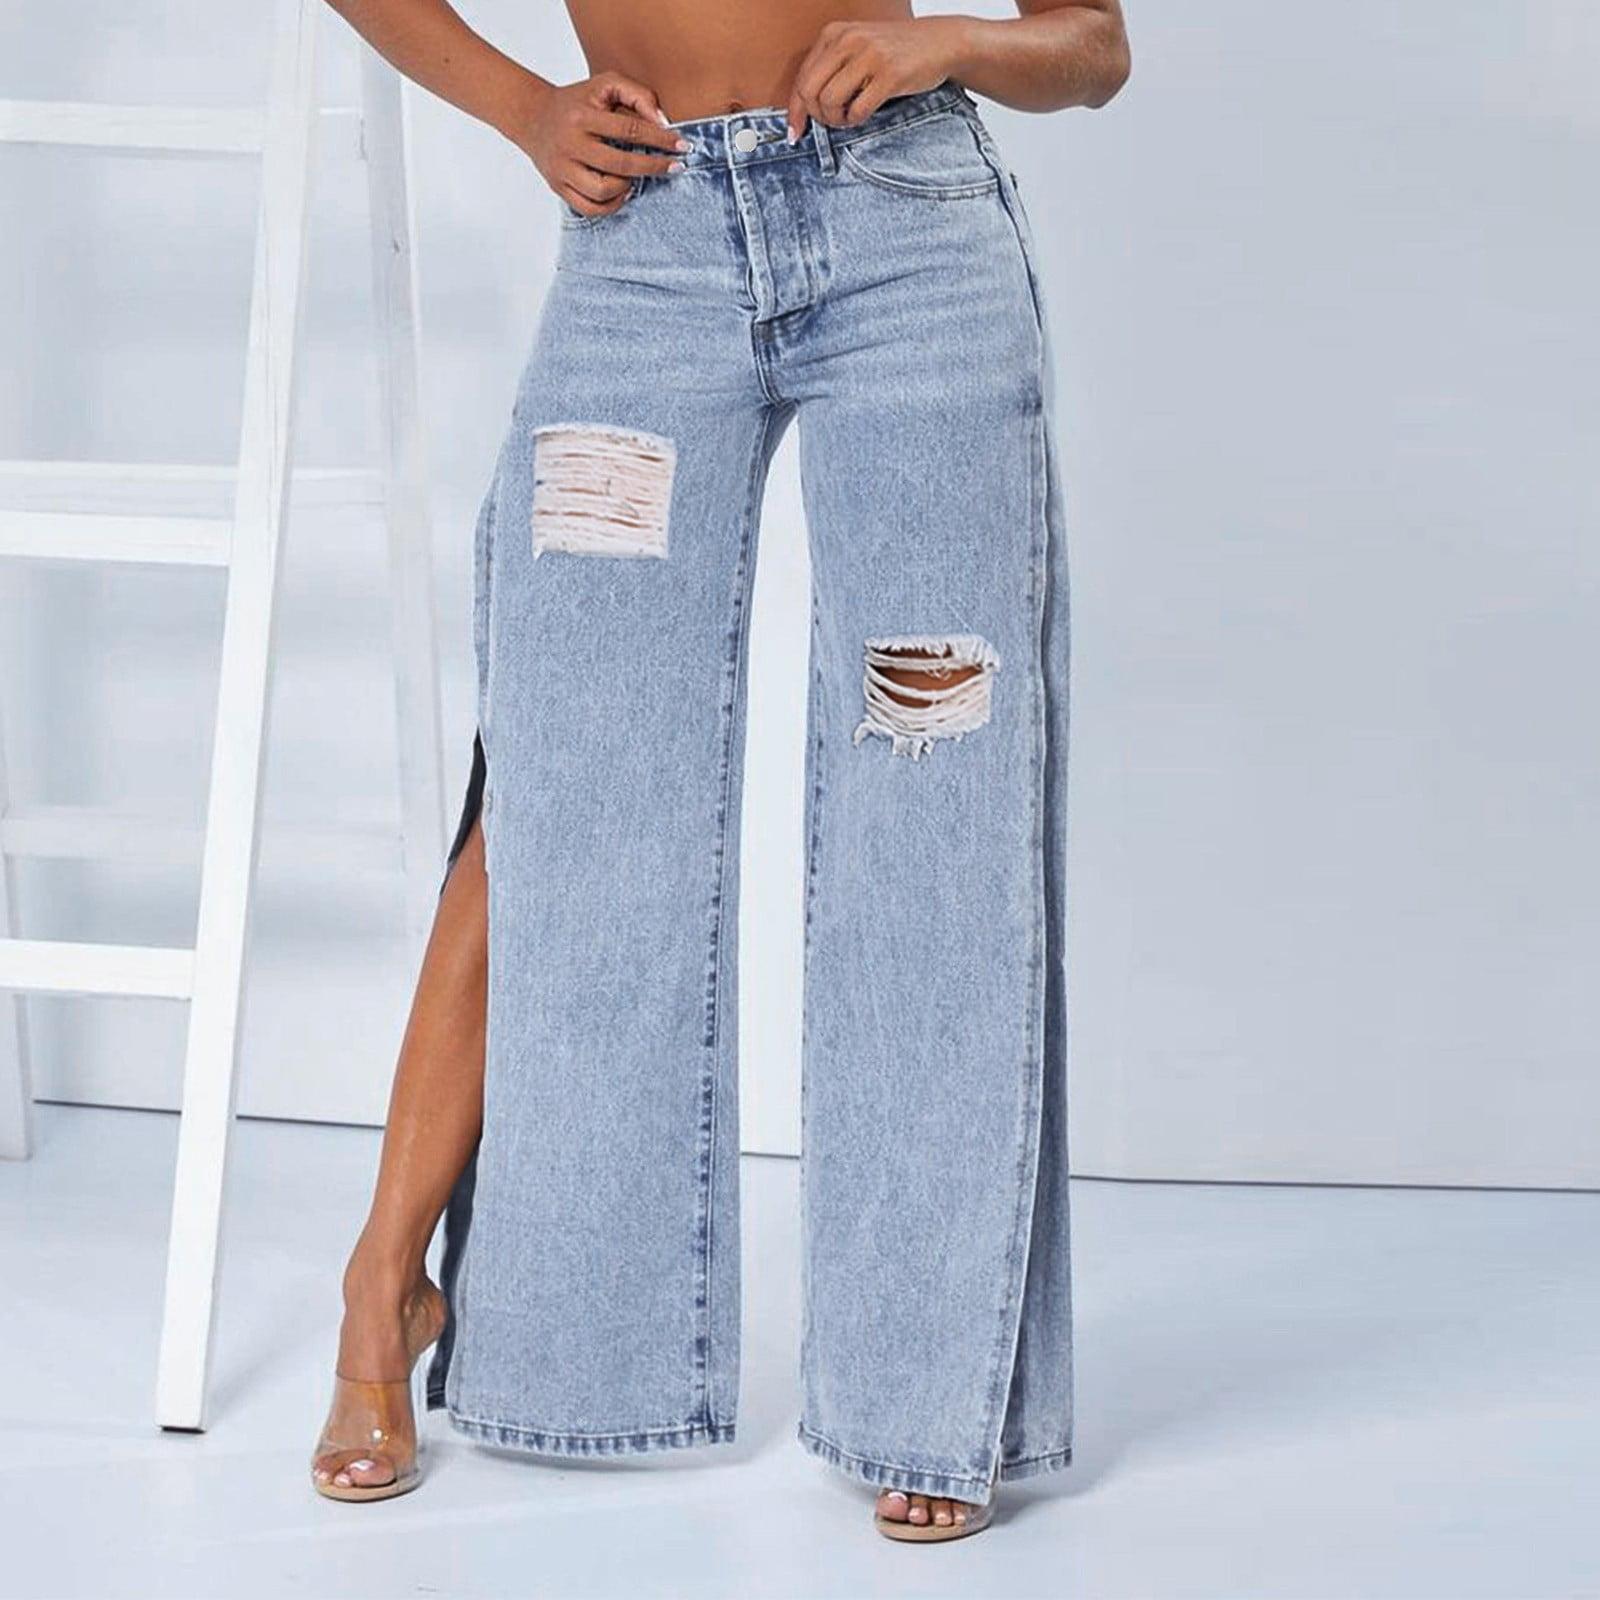 Stylish New Women Hole Patchwork Casual Denim Jeans Pants Bottom Trousers